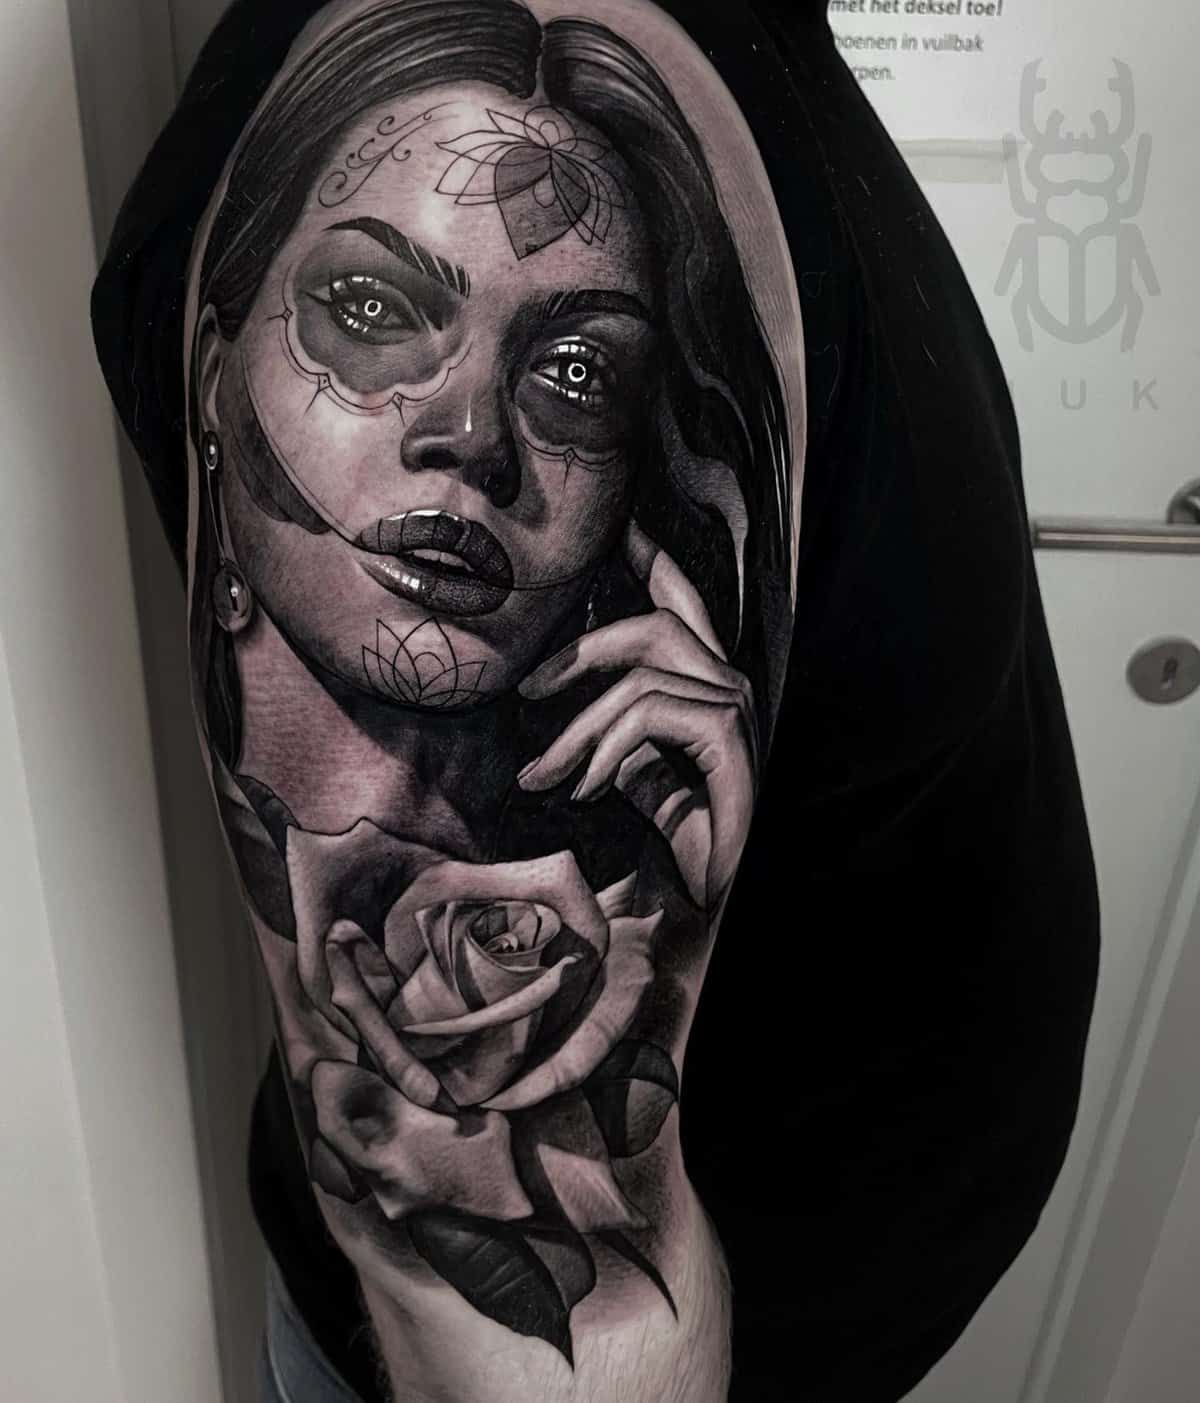 Share more than 75 black and grey realistic tattoo - in.eteachers